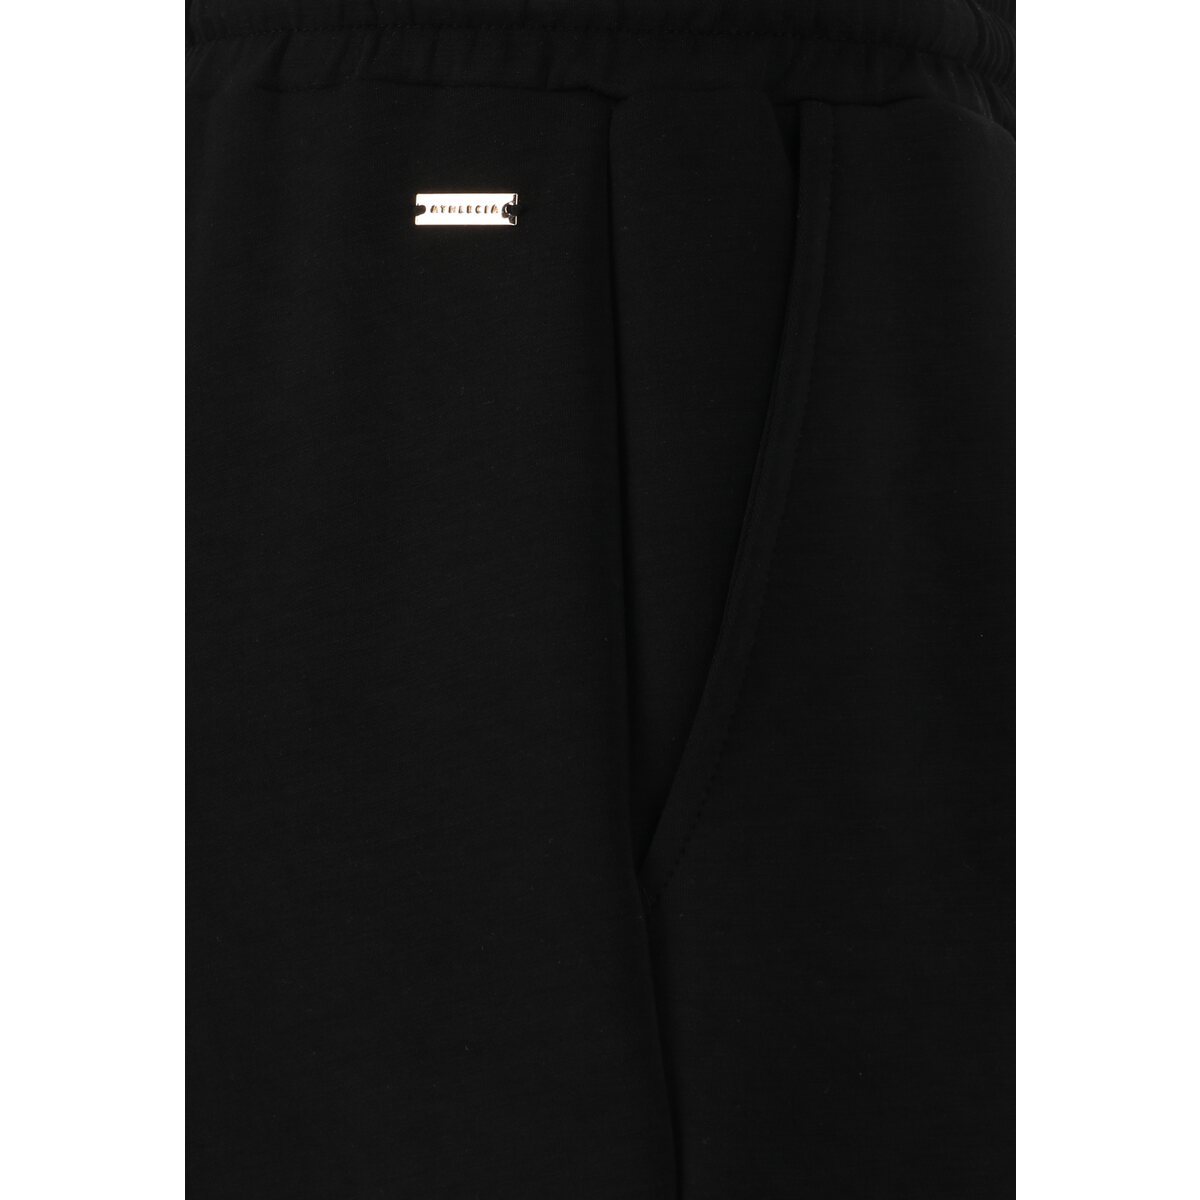 Athlecia Jacey V2 Womenswear Sweat Pants - Black 8 Shaws Department Stores